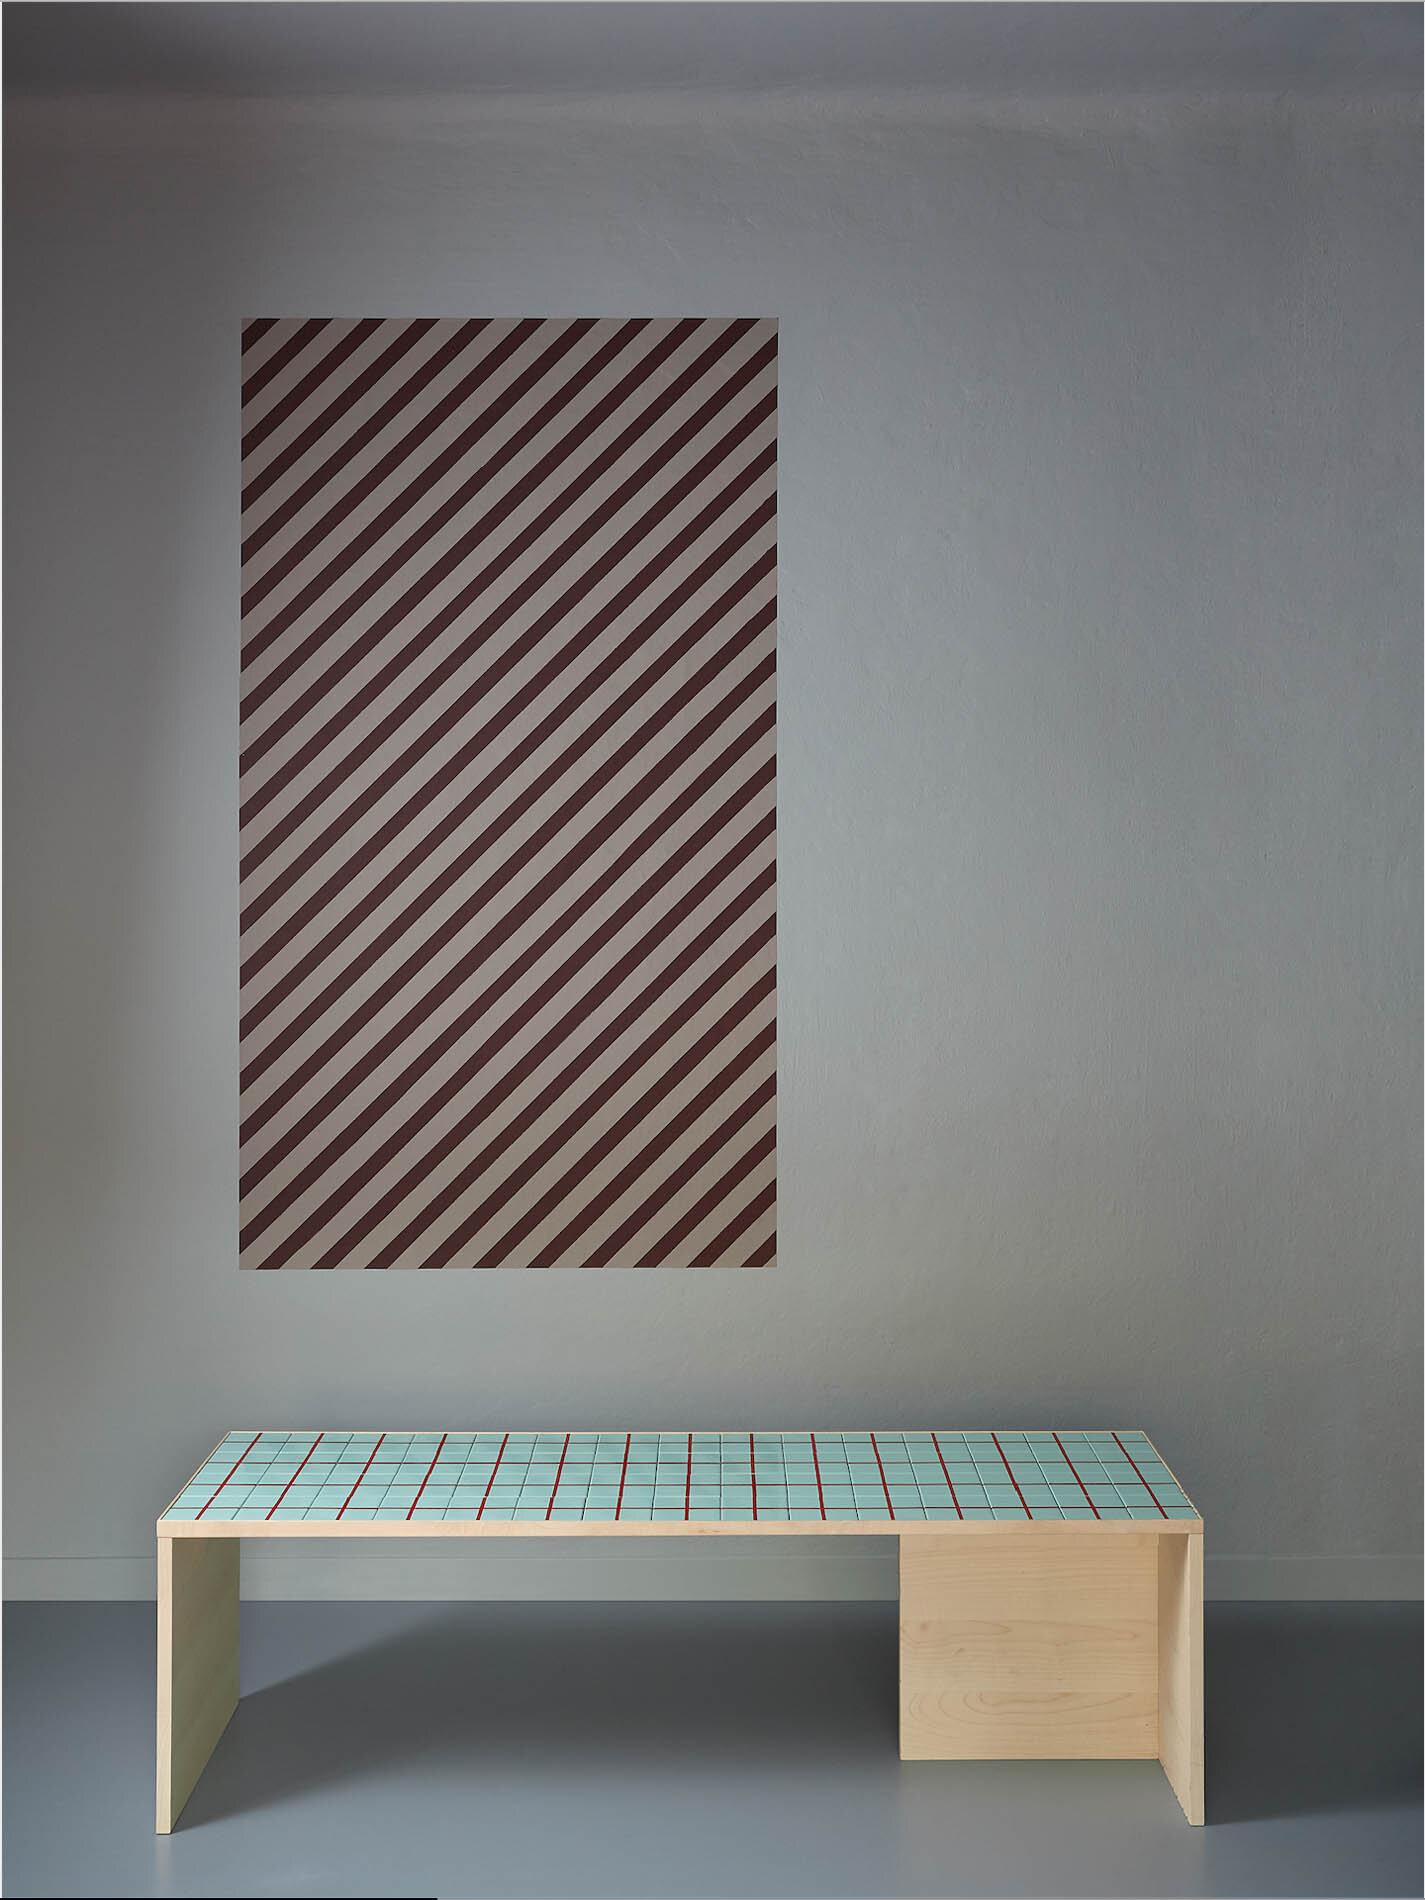 Bench with clay tiles in format 10x10x1 cm decorated with motif 'Geo Grid'